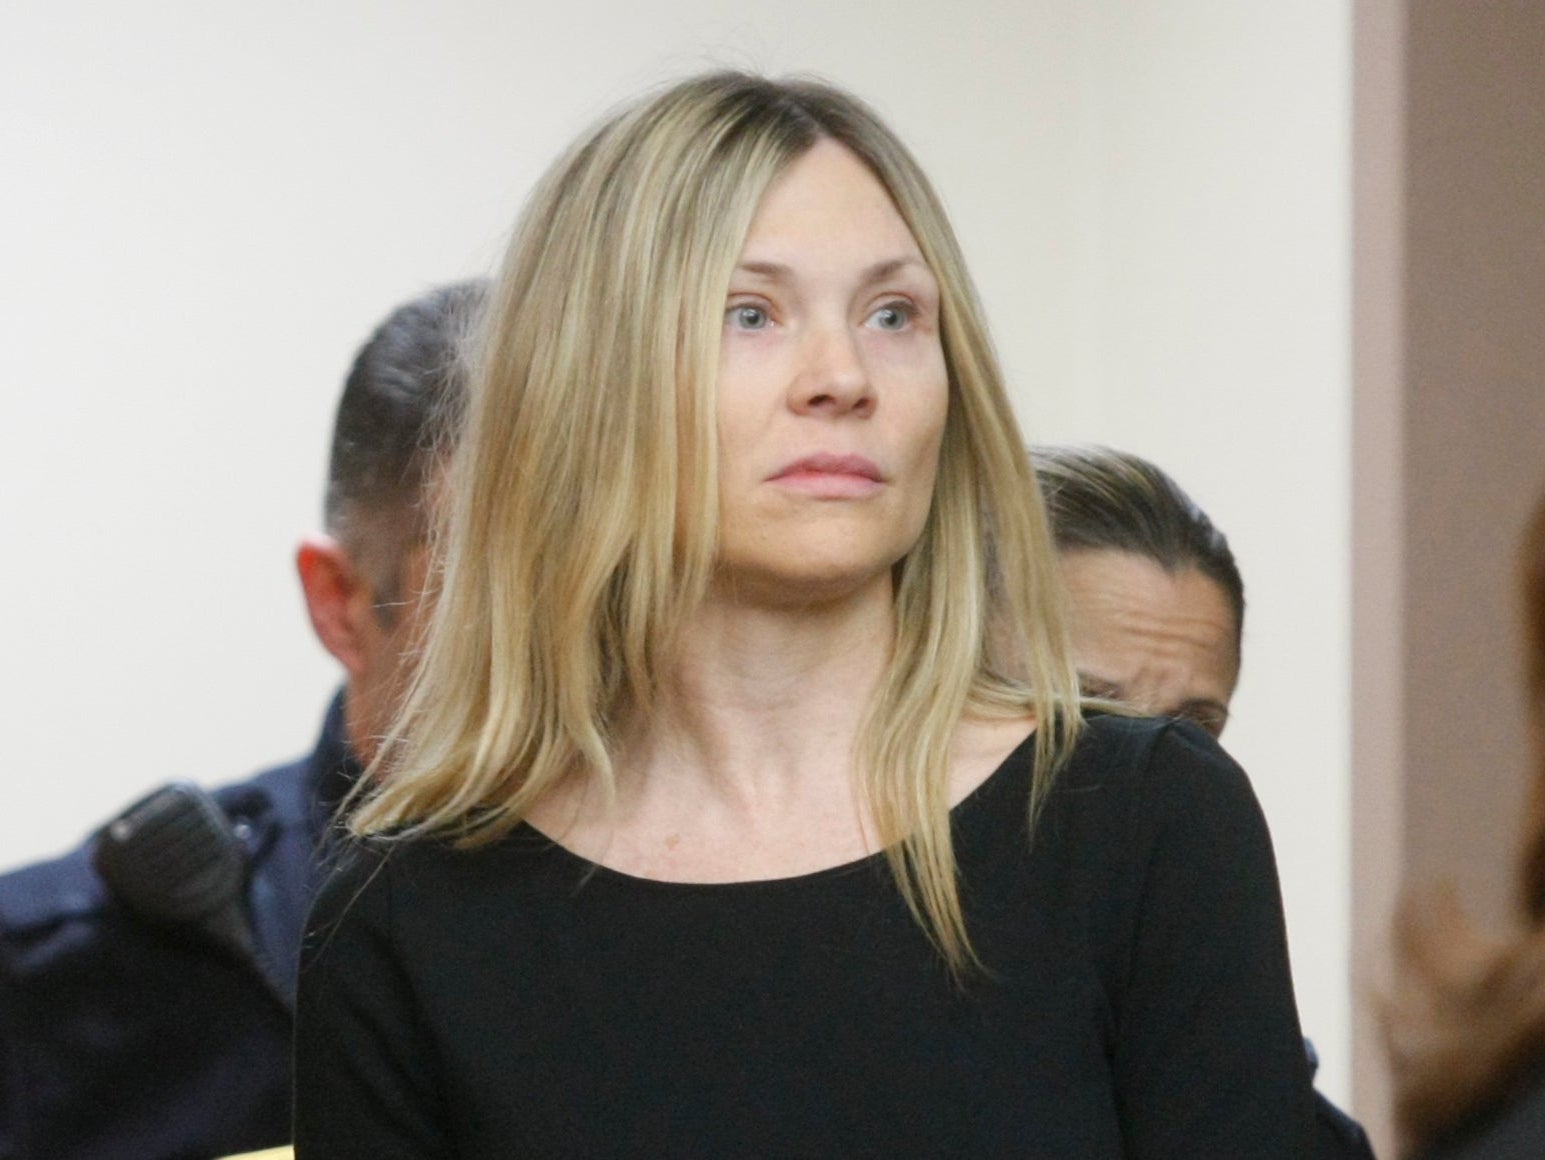 Amy Locane has been returned to jail after a crash back in 2010